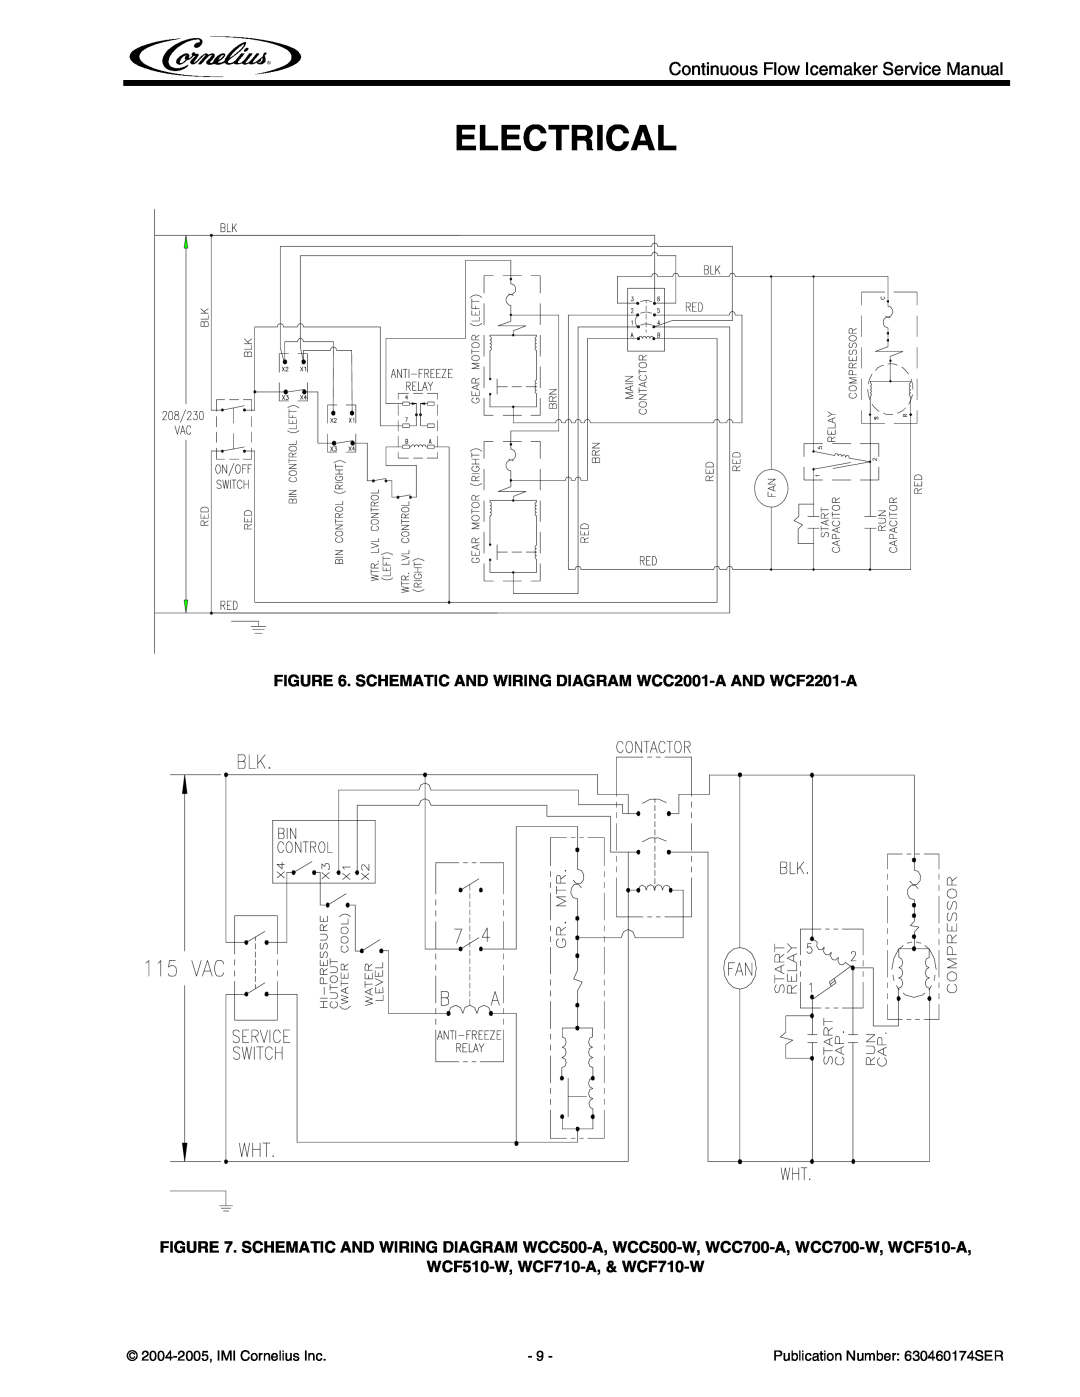 Cornelius 2000 - Series Electrical, SCHEMATIC AND WIRING DIAGRAM WCC2001-A AND WCF2201-A, WCF510-W, WCF710-A, & WCF710-W 